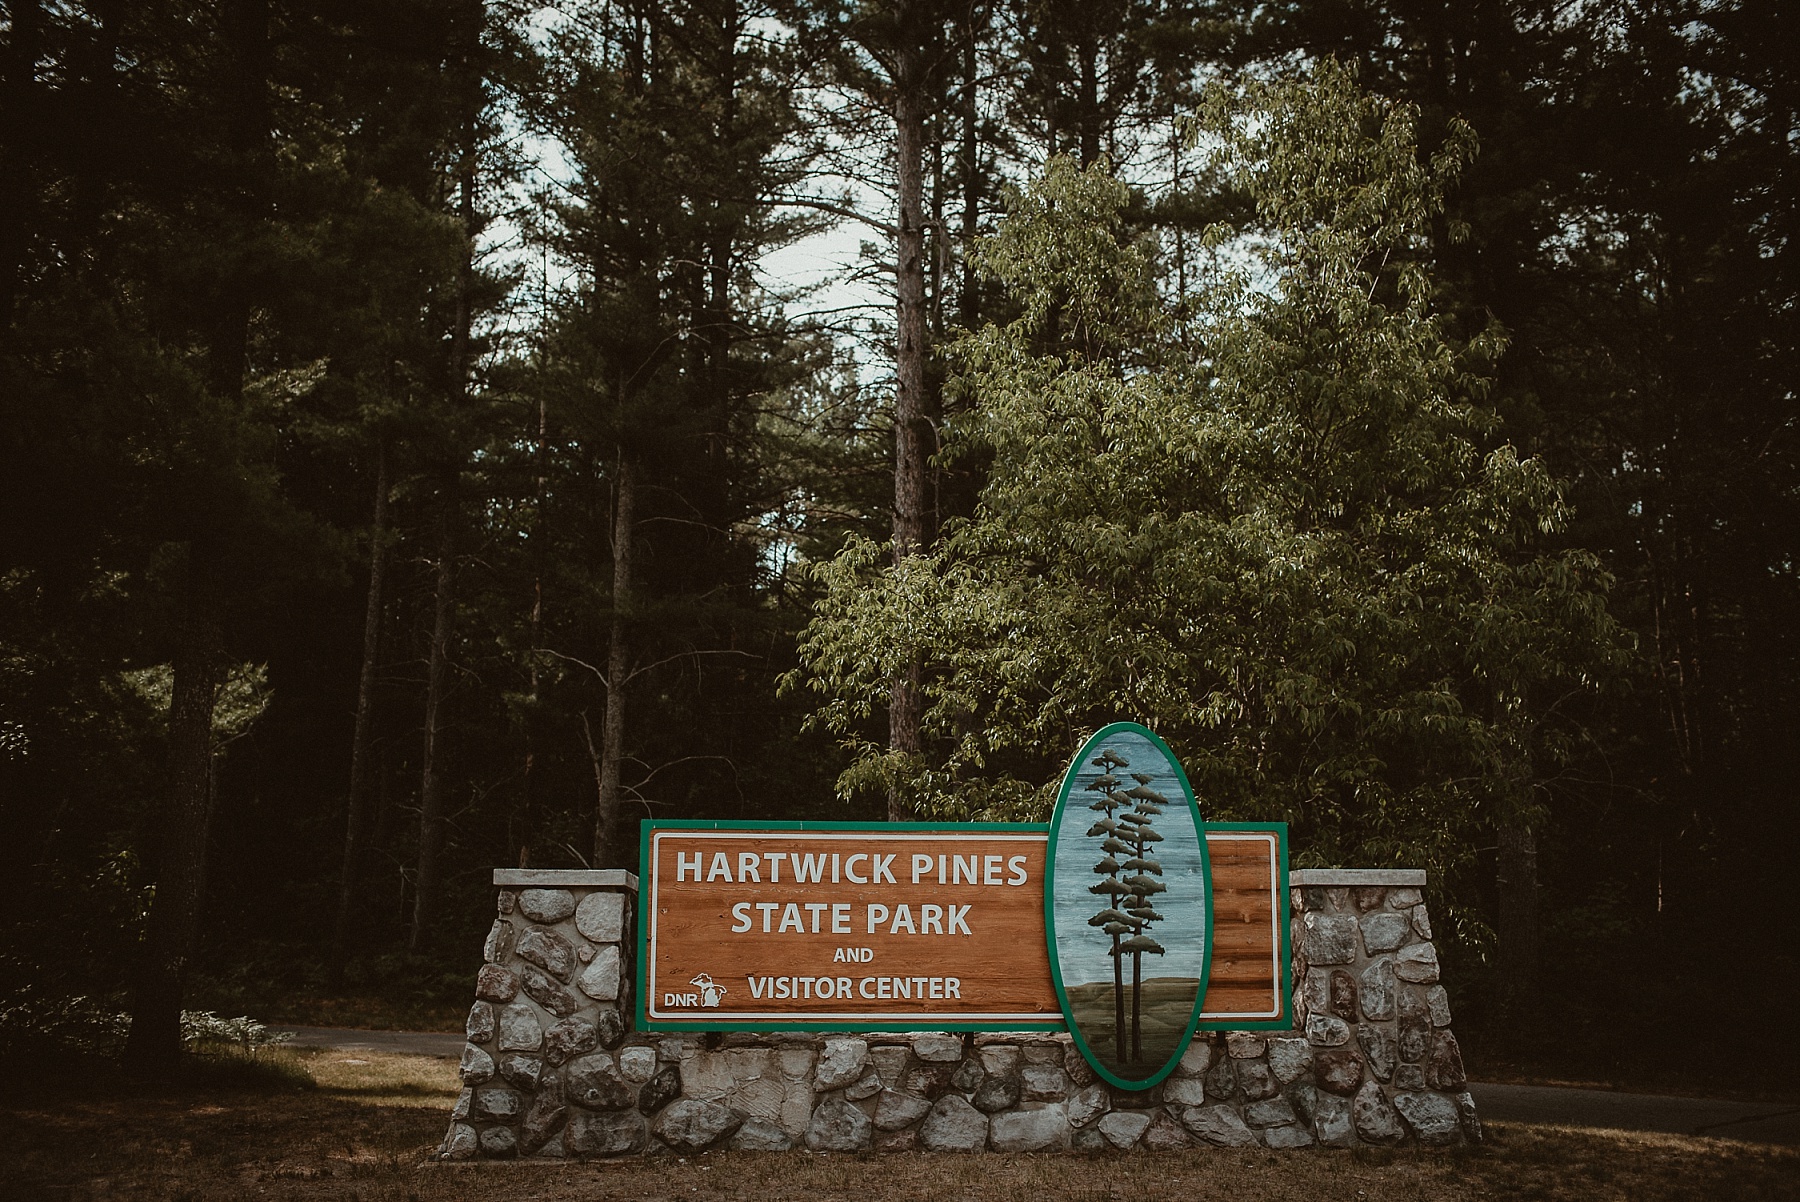 Grayling, Michigan's Hartwick Pines State Part entrance sign